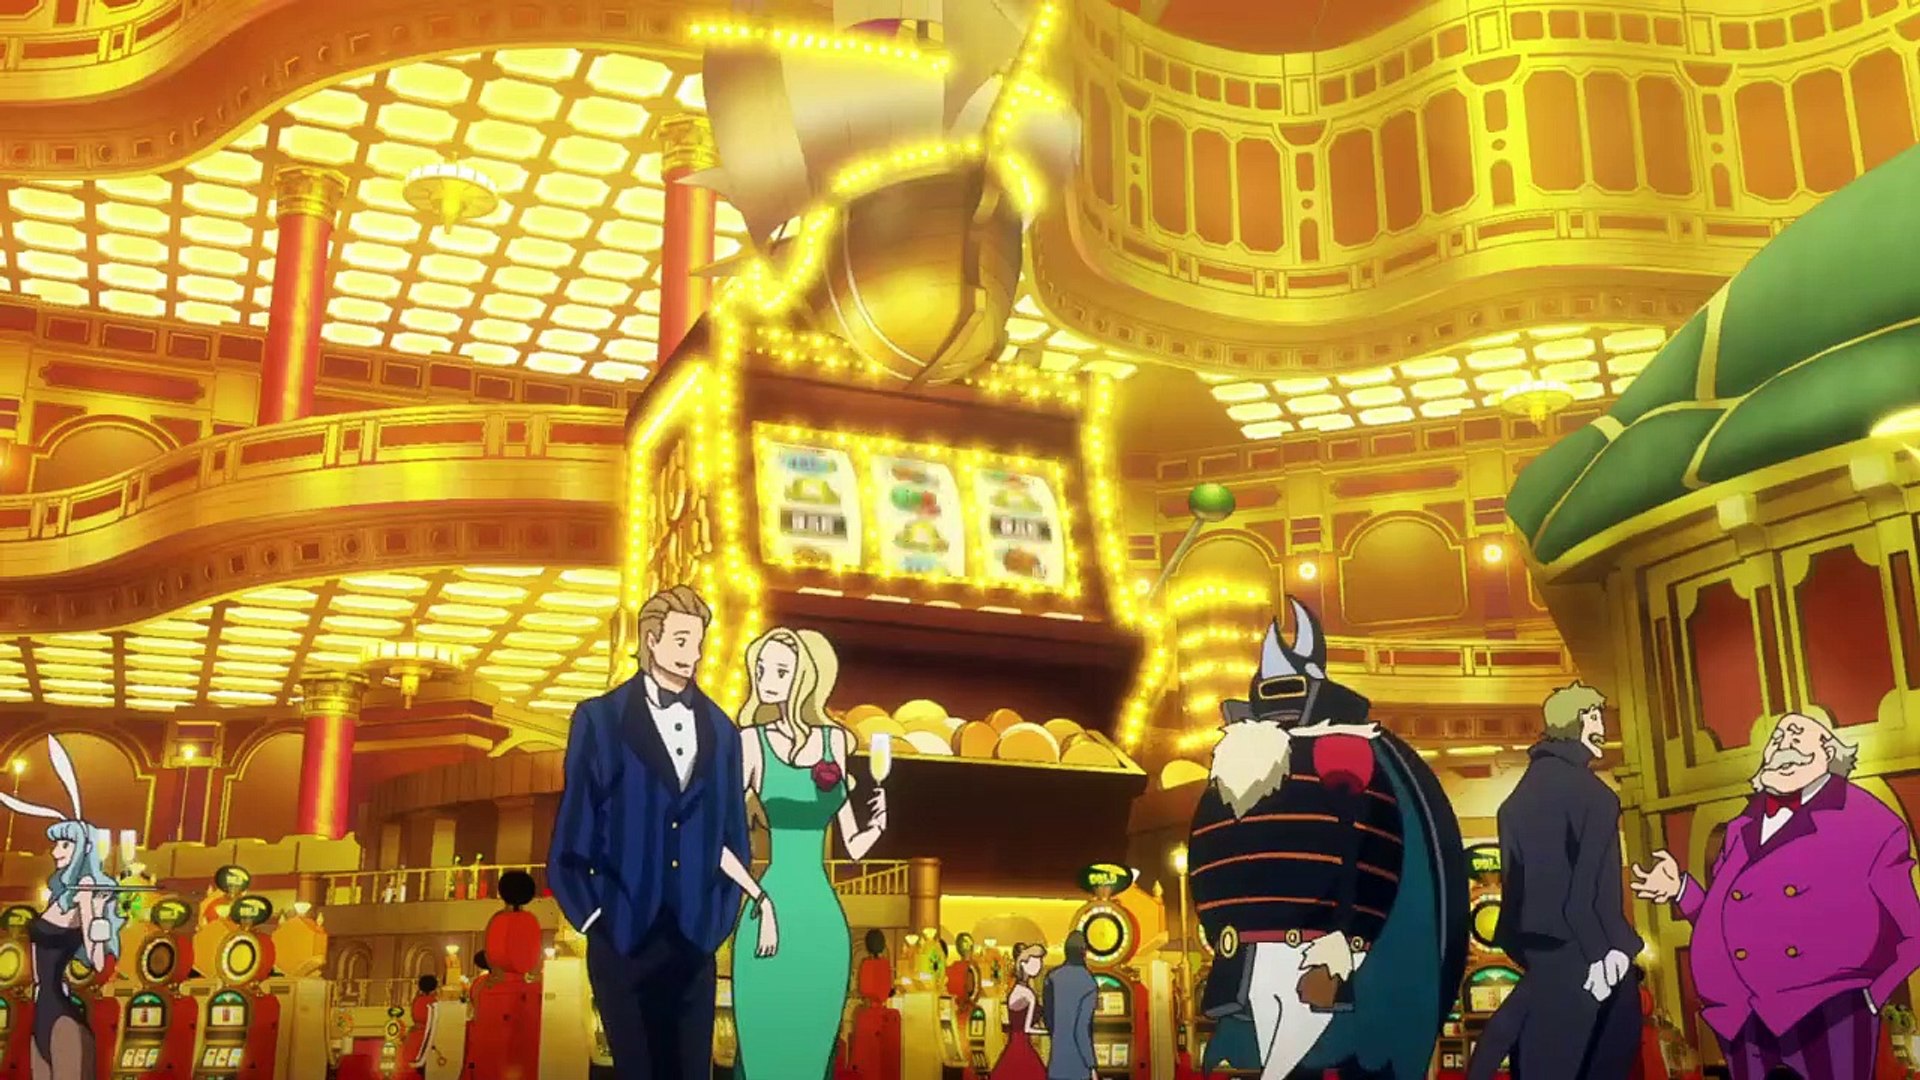 ONEPIECE FILM GOLD official Trailer Sub English - video Dailymotion